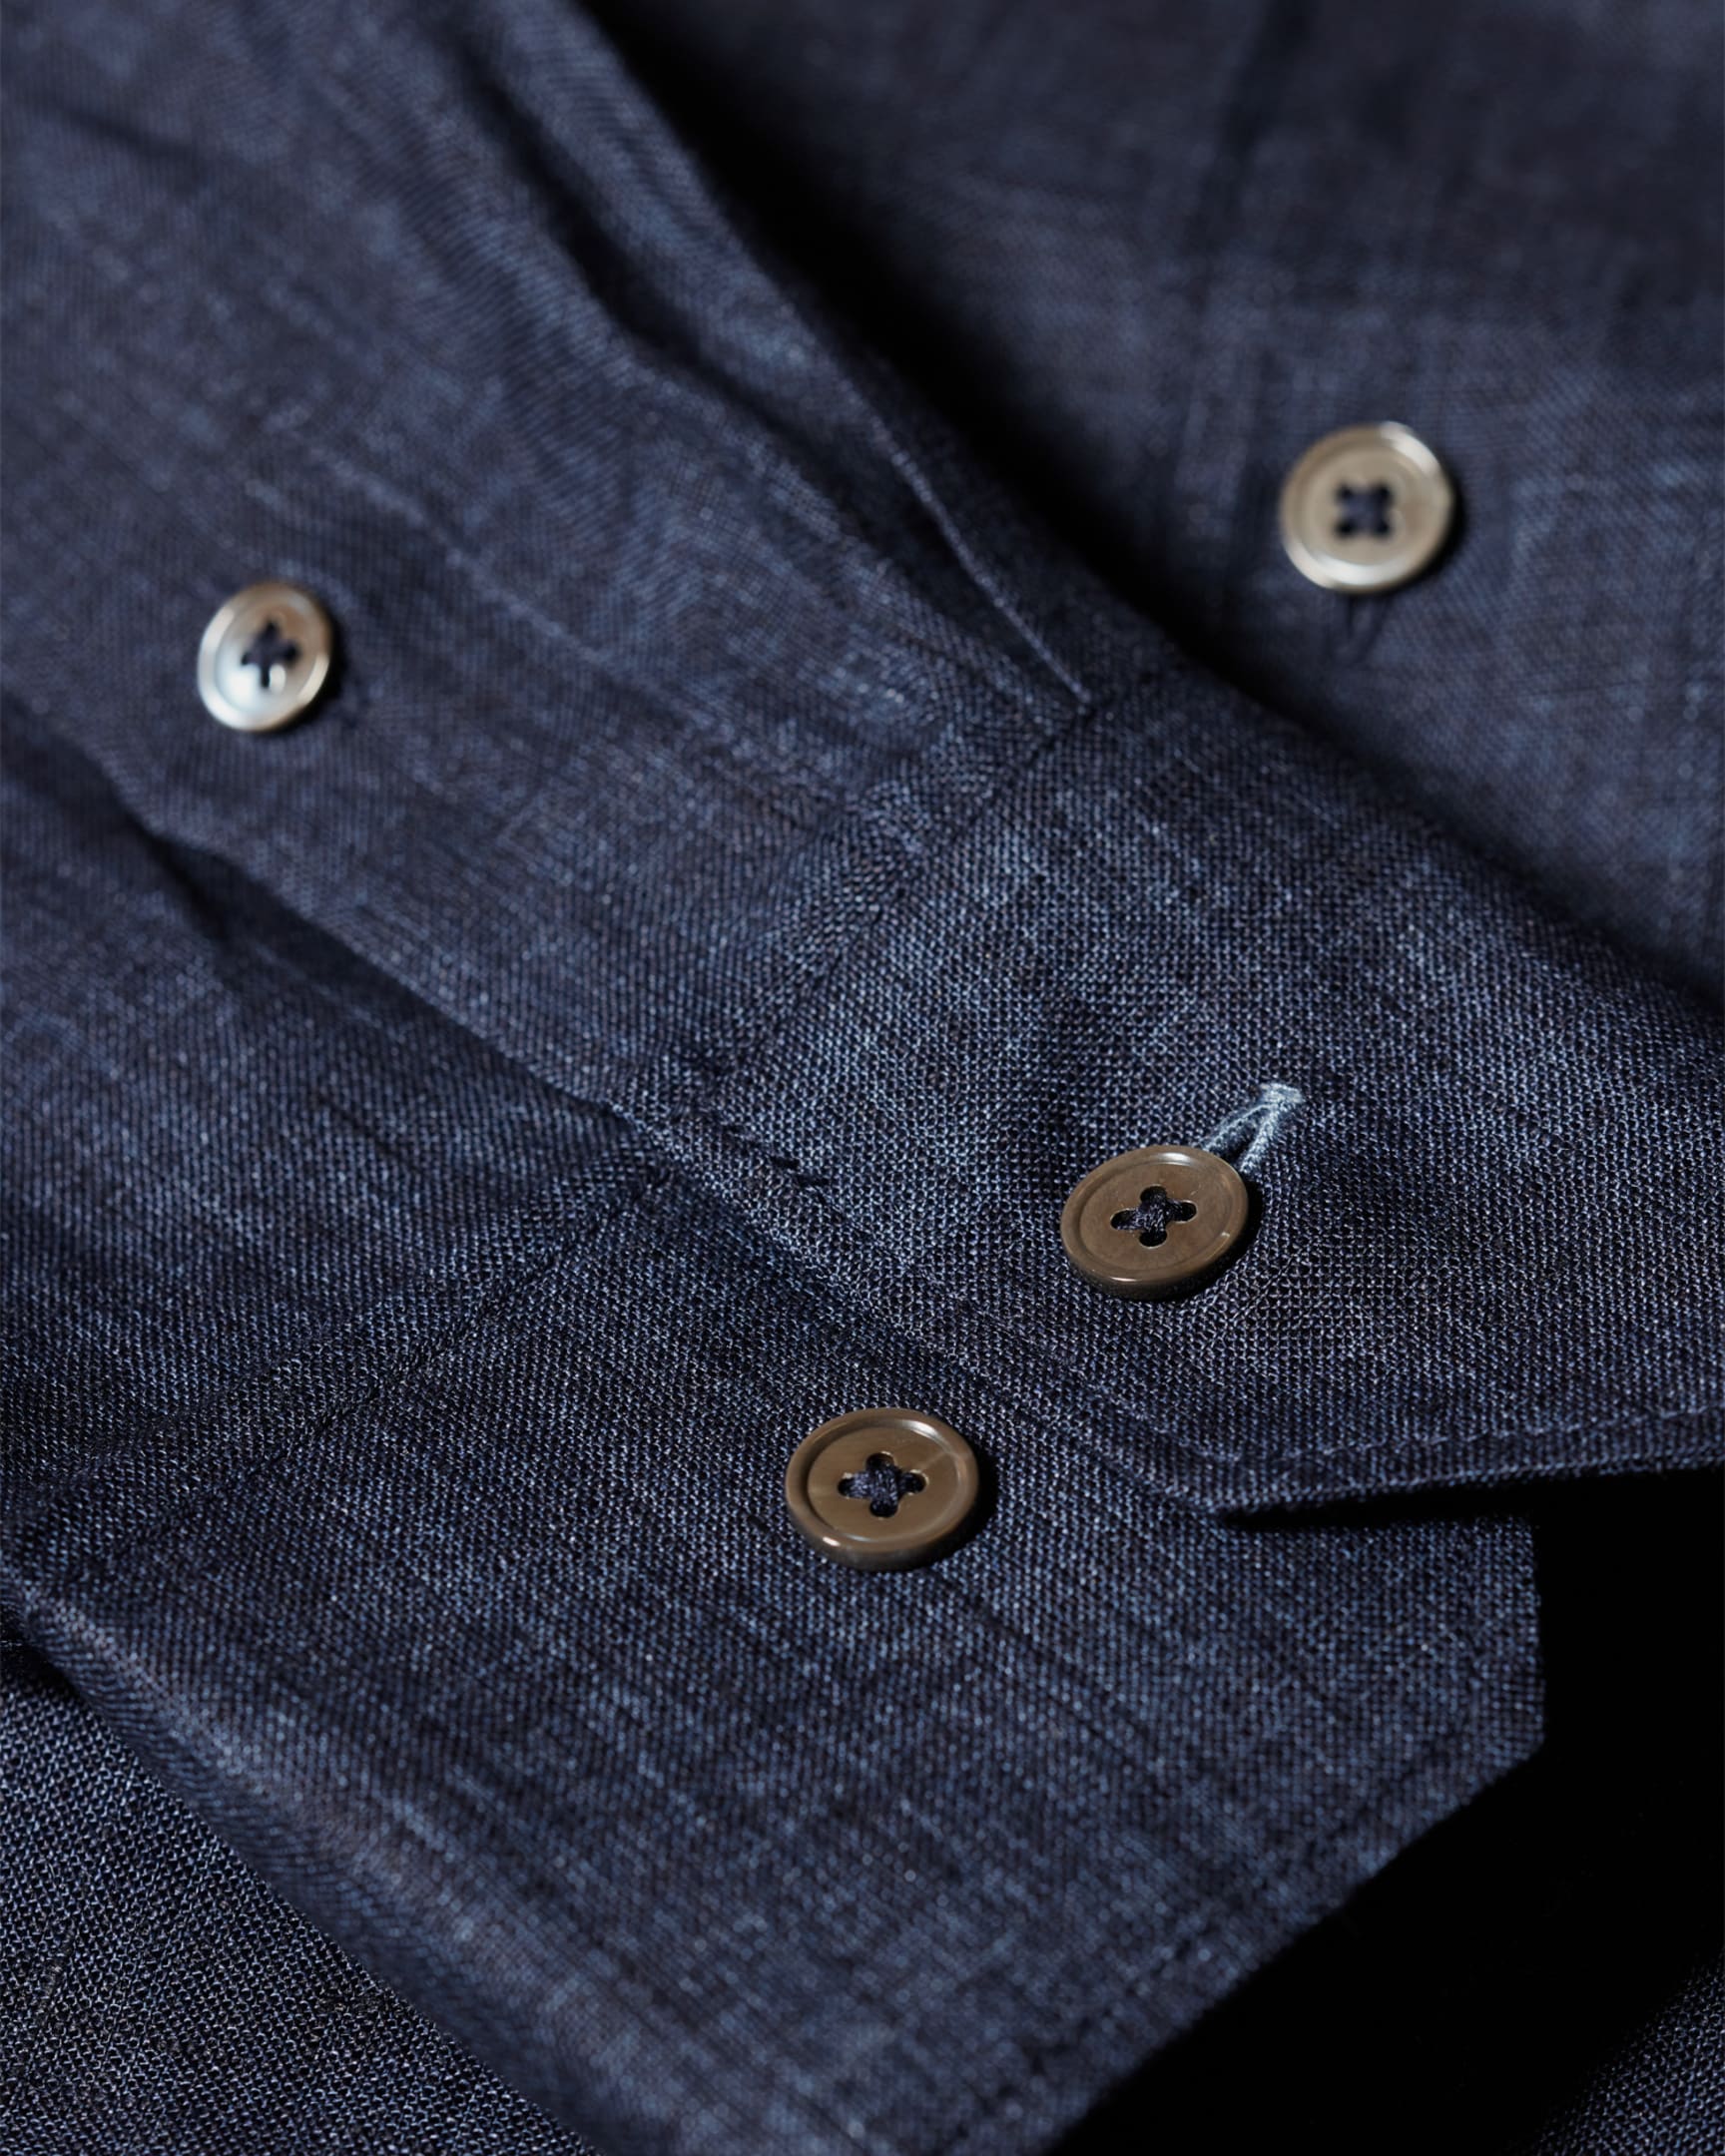 Detail View - Slim-Fit Navy Linen Shirt Paul Smith